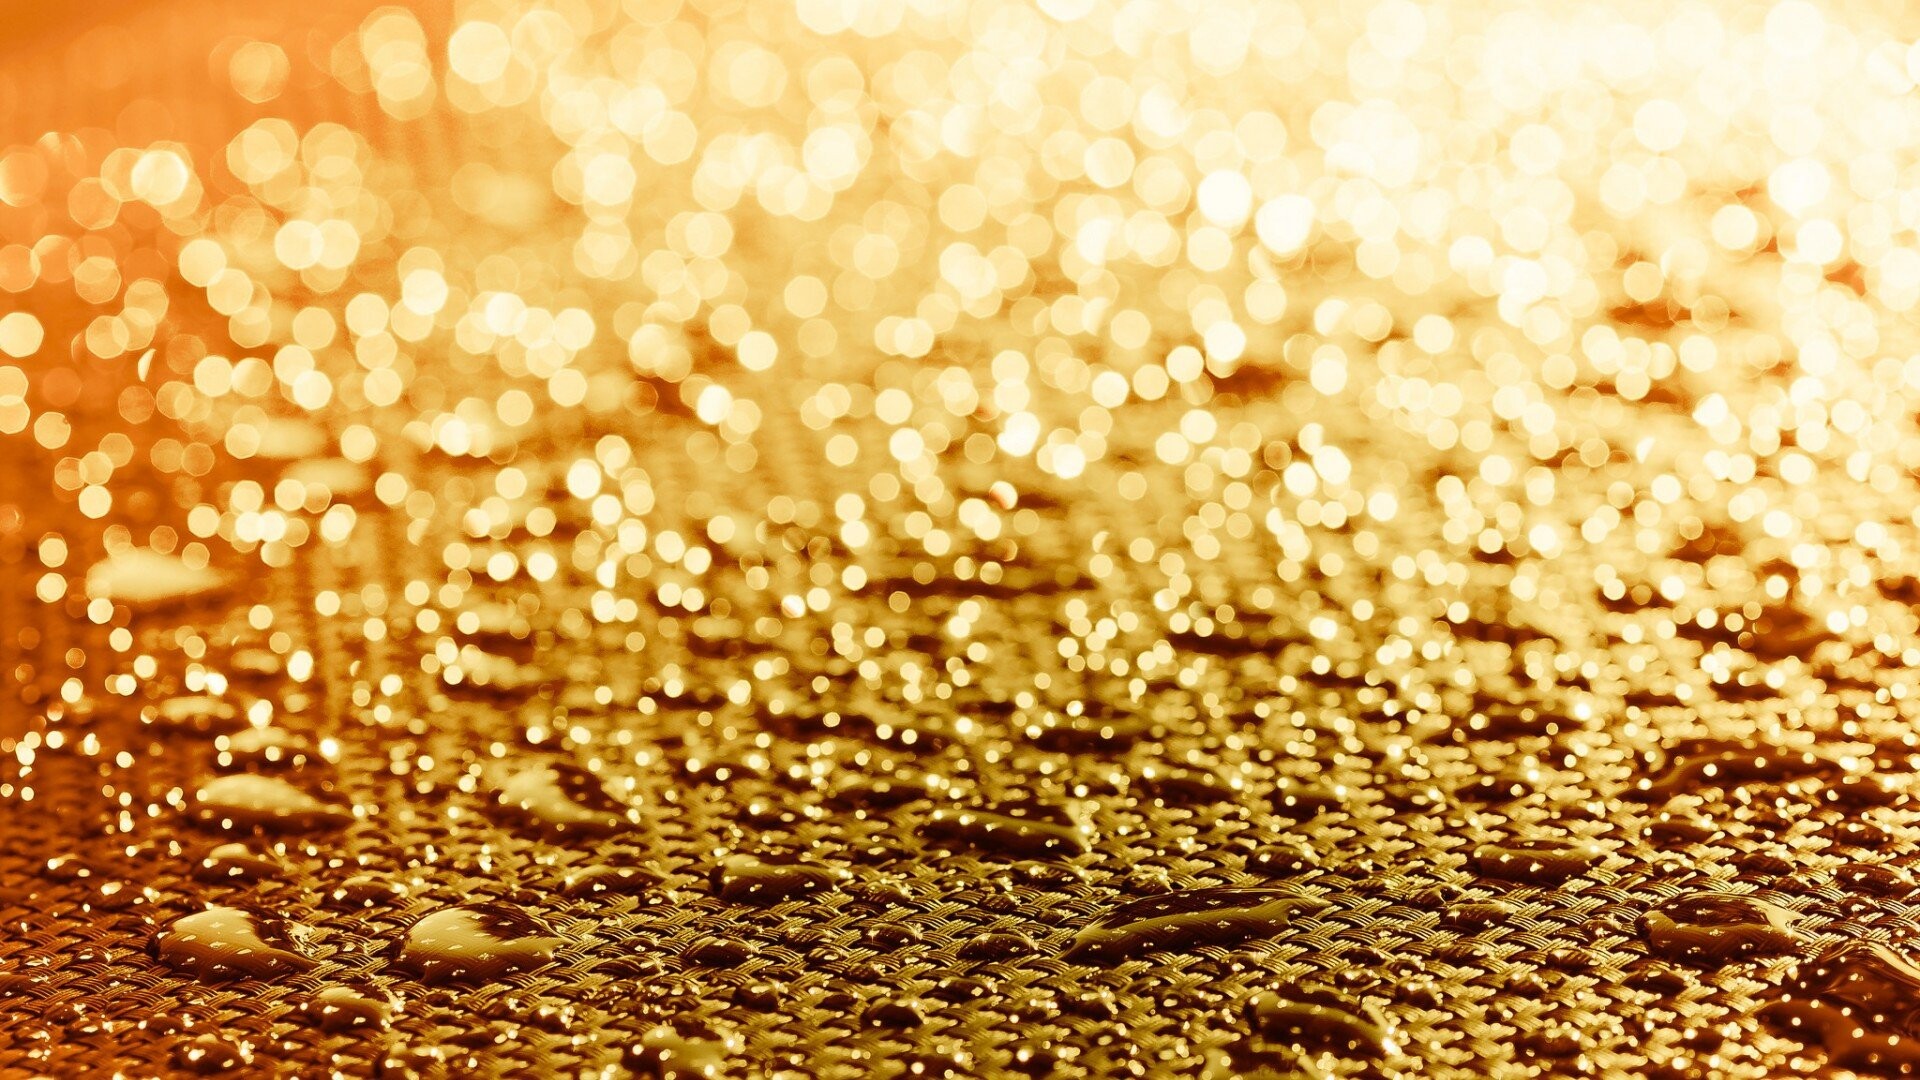 Gold Lights: Blurred lights on the wet surface, Rain drops on the braided fabric. 1920x1080 Full HD Background.